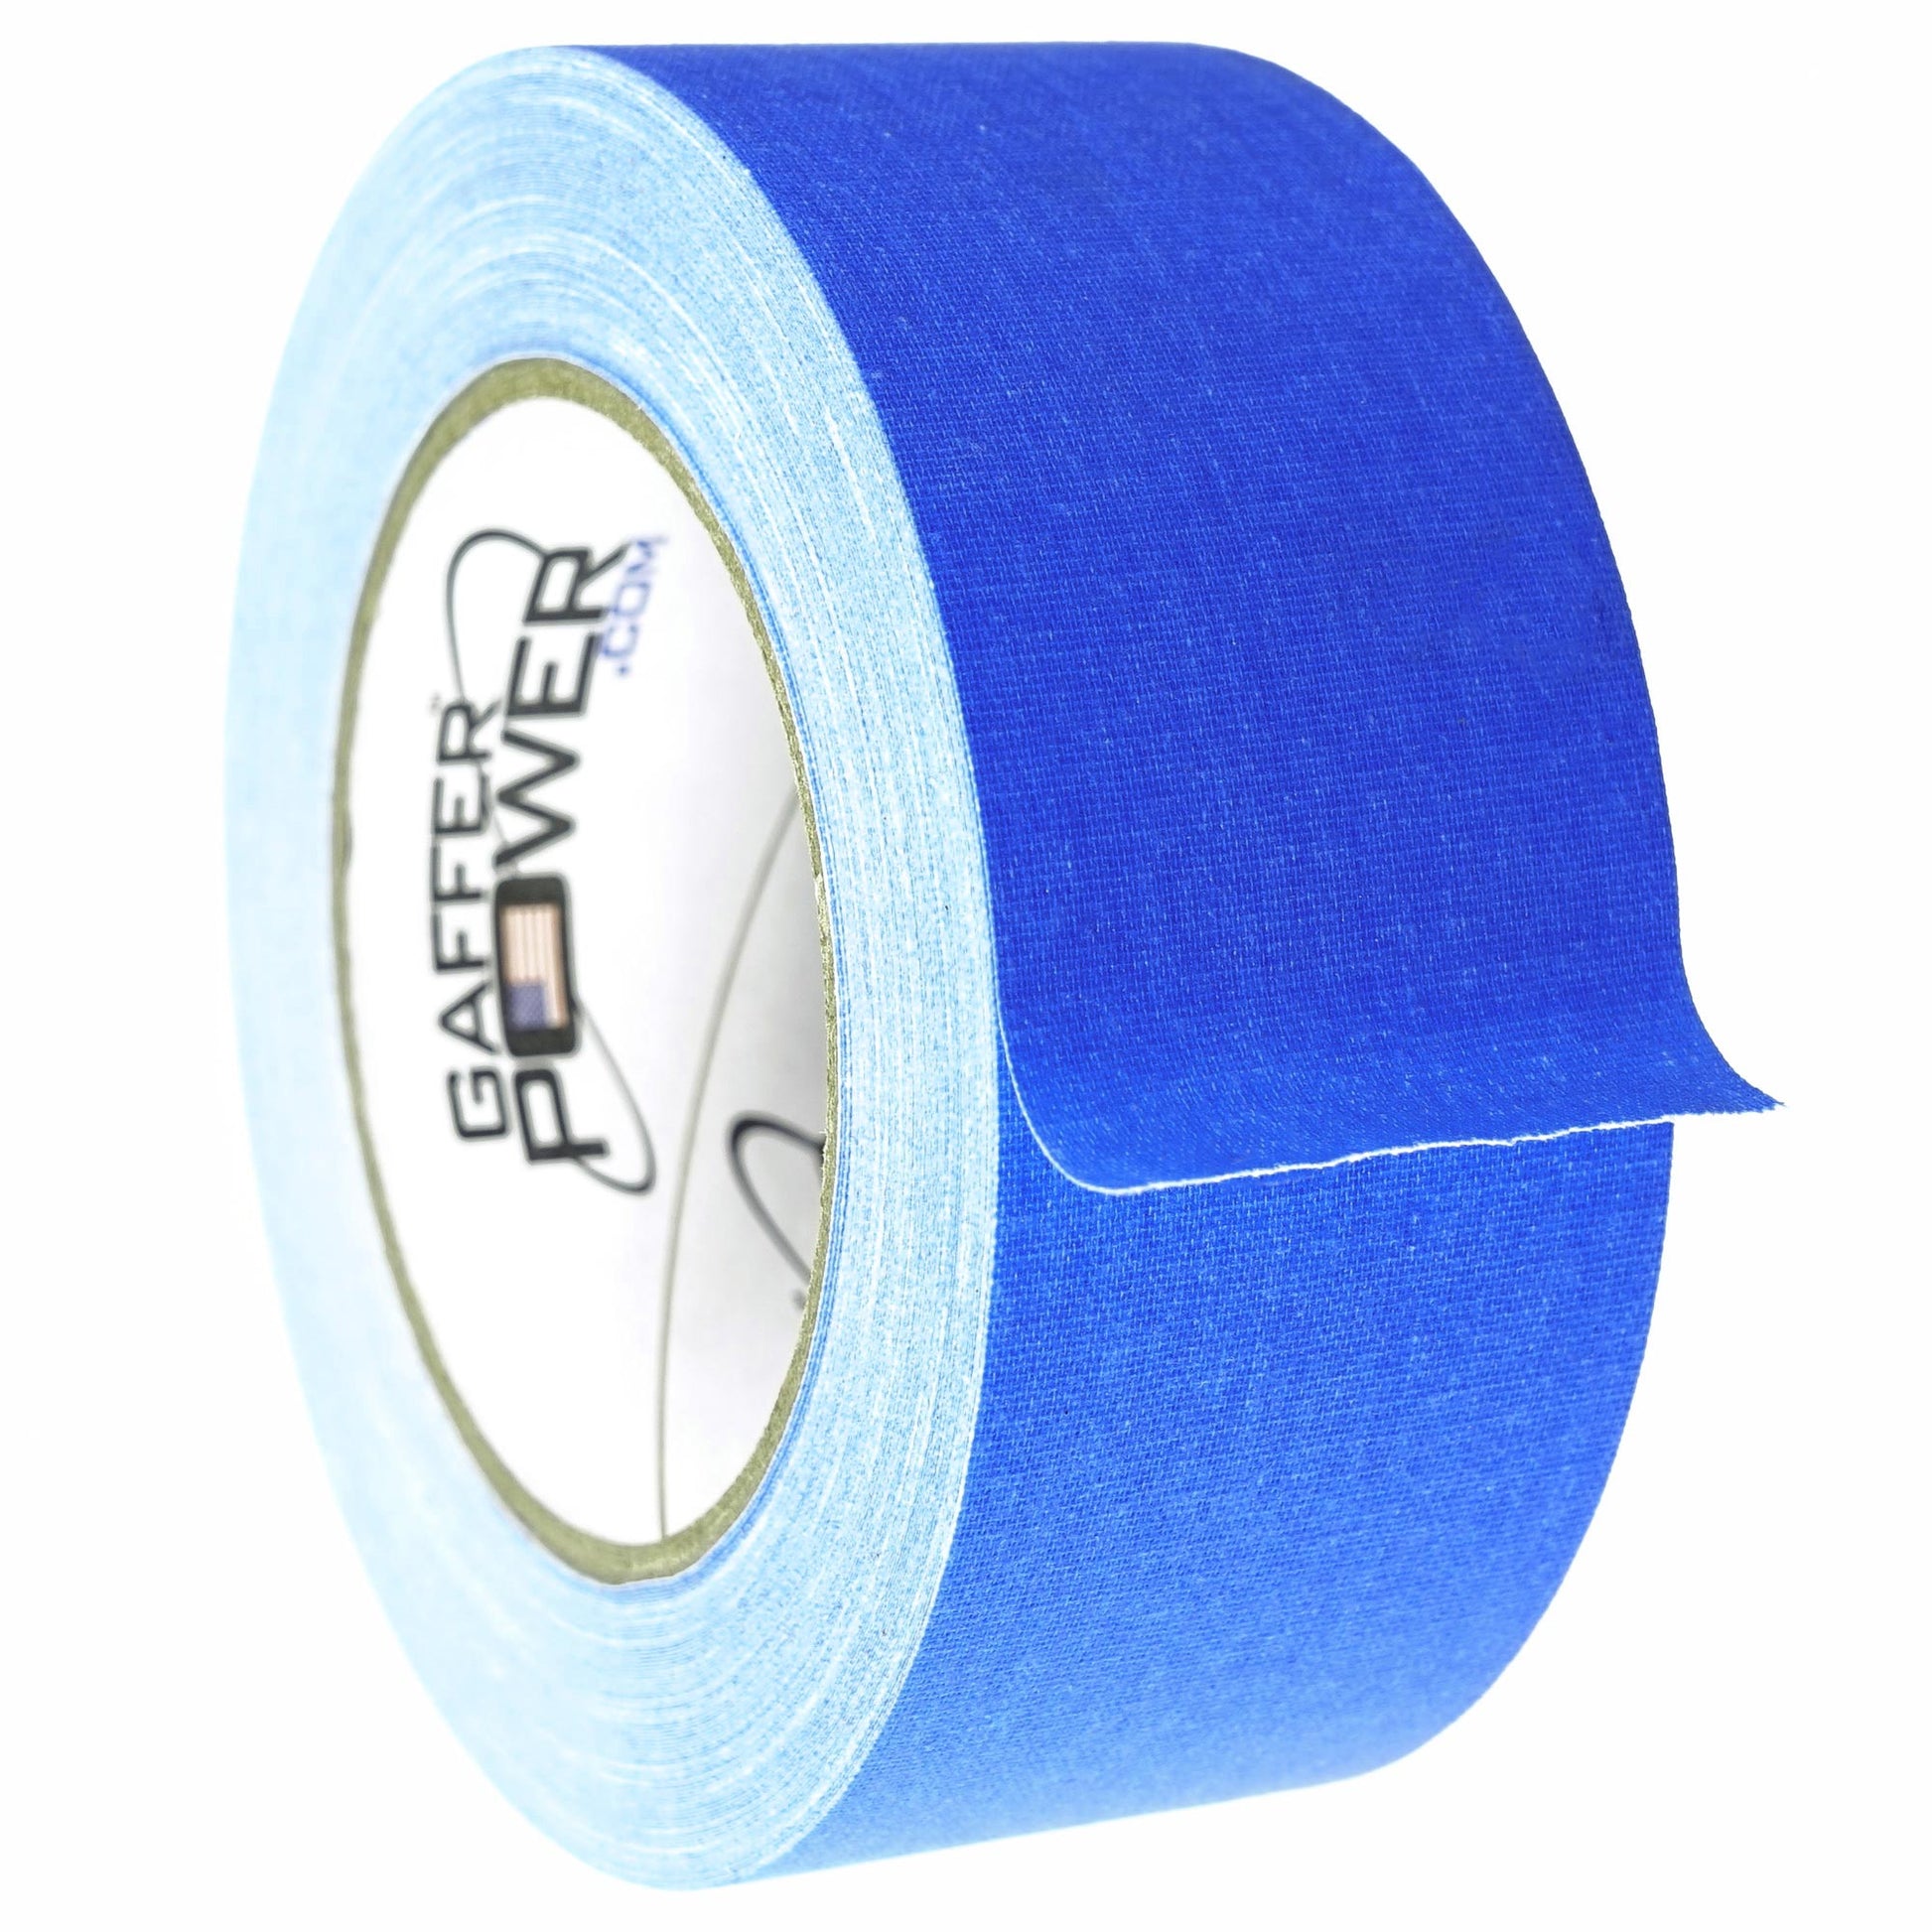 Wide Blue Painters Tape, 4 inch x 60 Yards, 3D Printing Tape - Masking Tape